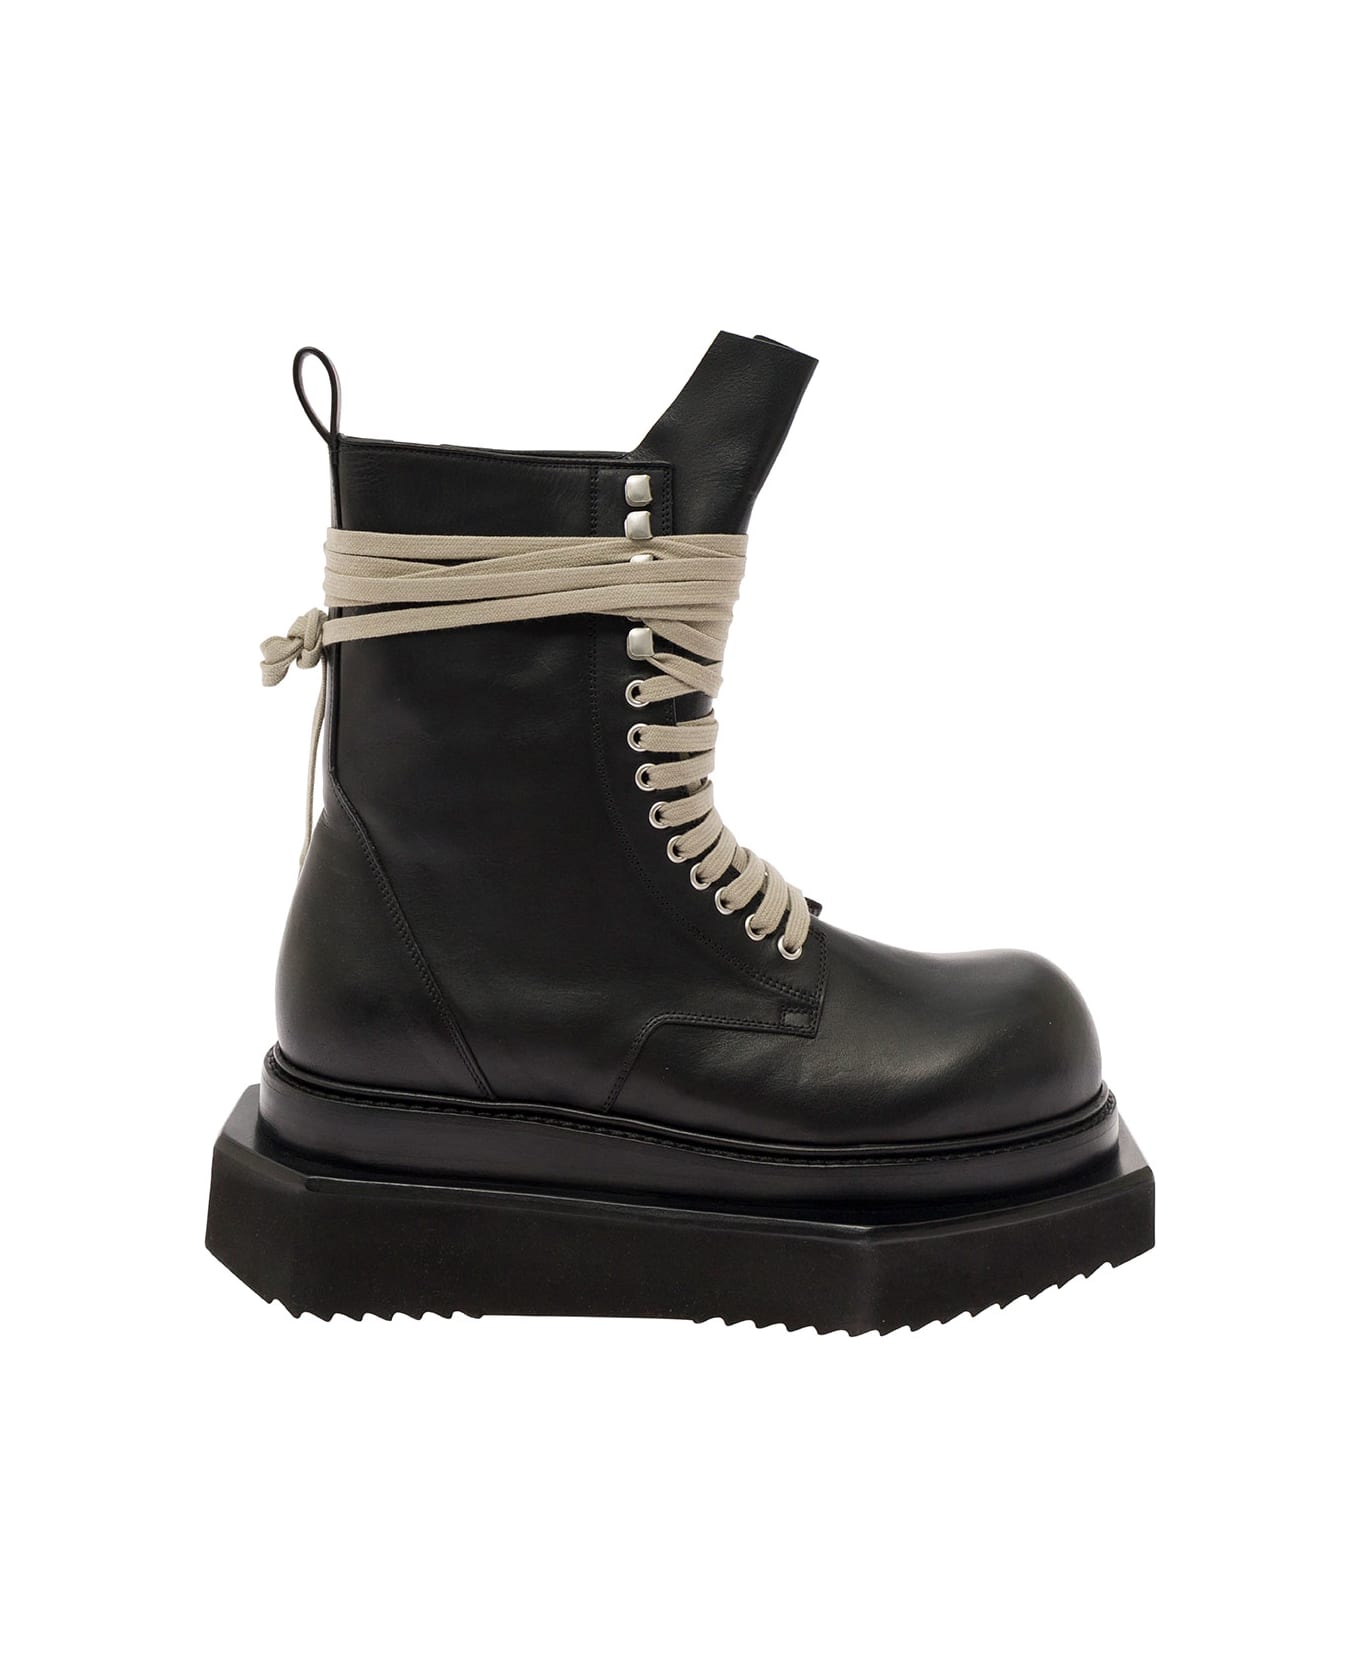 Rick Owens 'turbo Cyclops' Black Lace-up Boots With Oversized Platform In Leather Man - Black